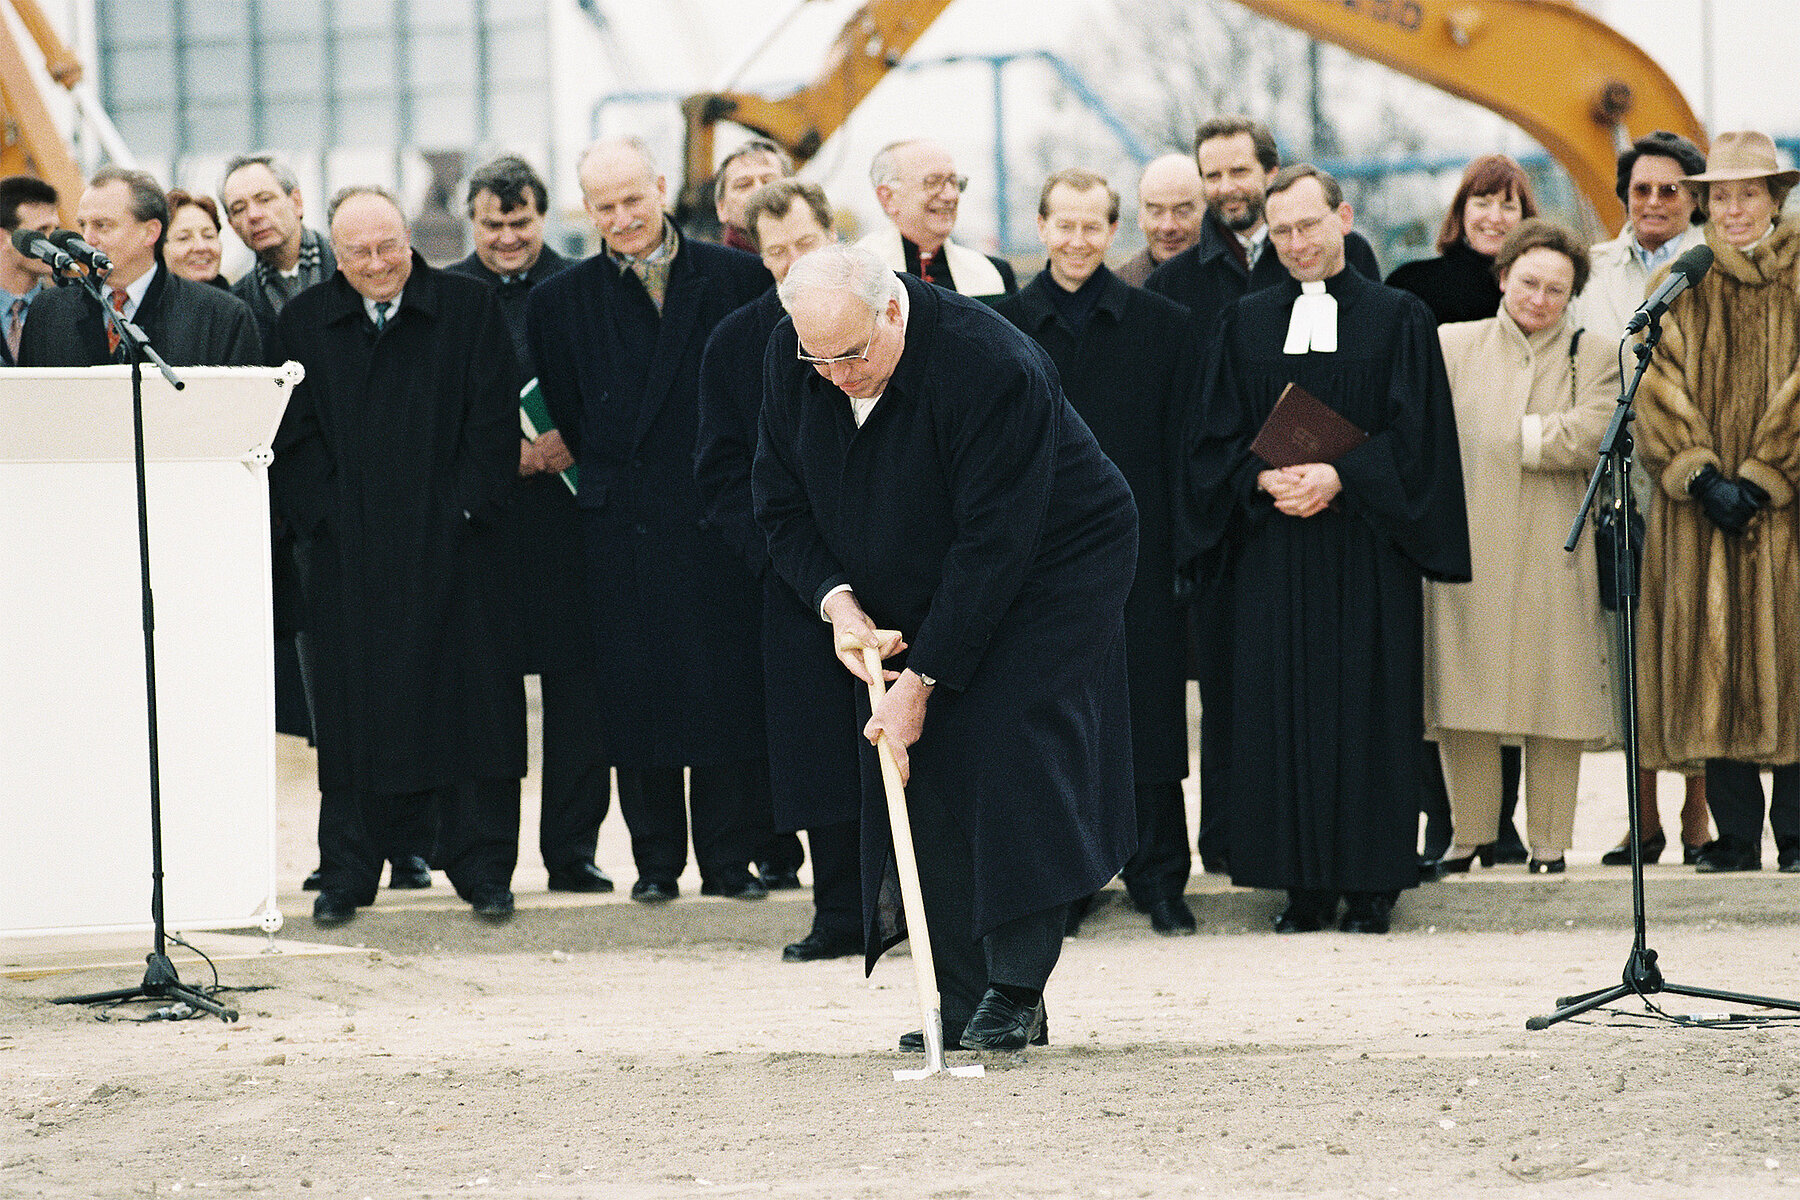 Helmut Kohl stabs the ground with a spade, behind him stands a row of people, including a pastor holding a Bible.